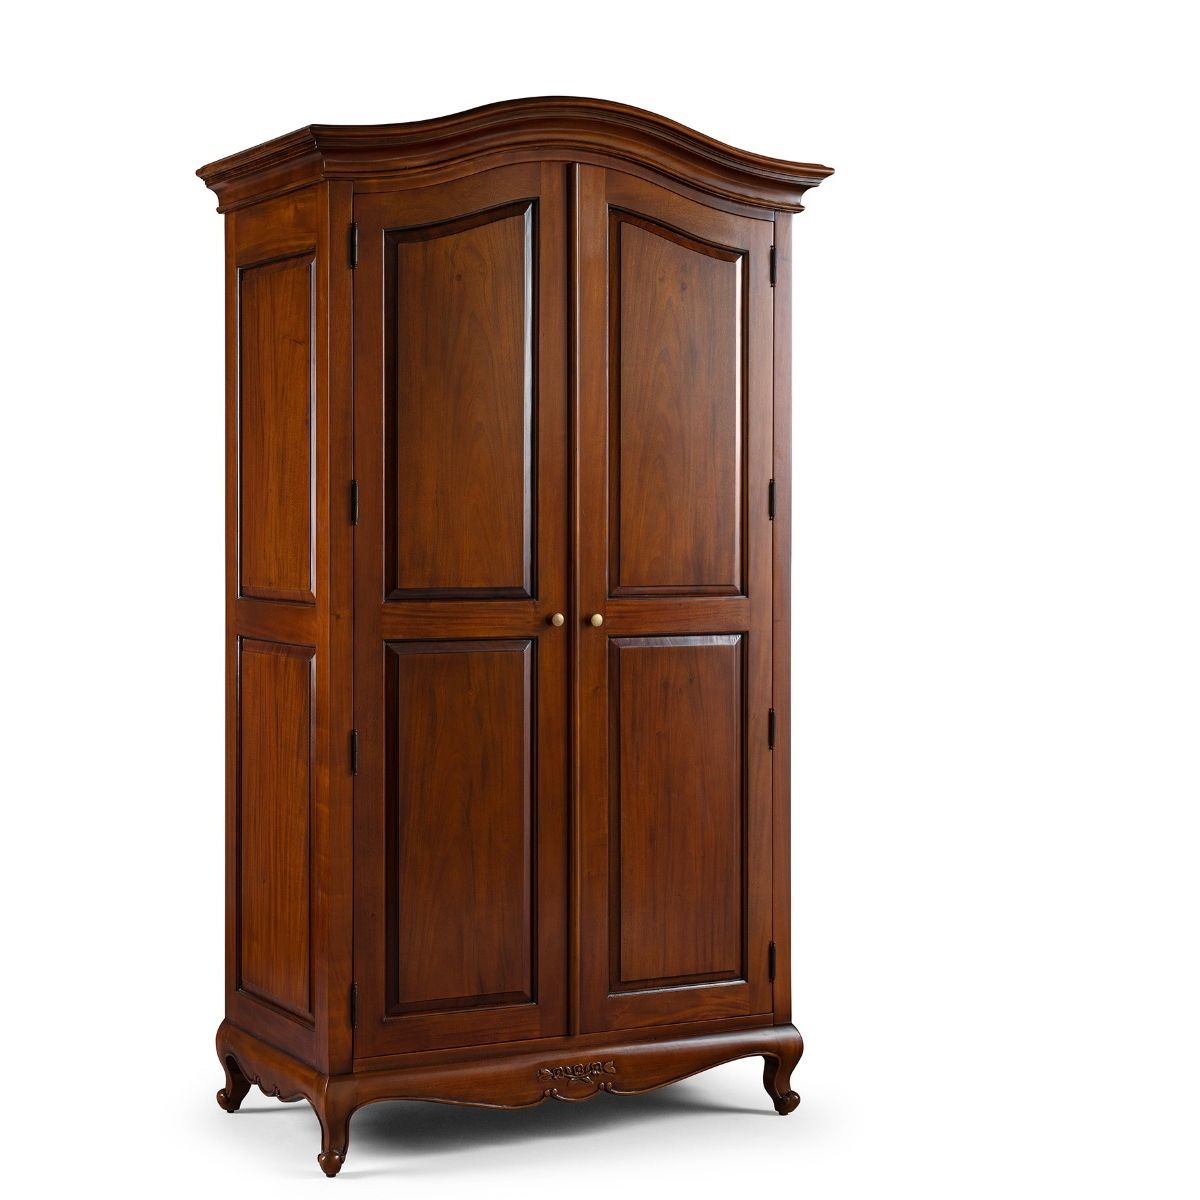 Alexander French Double Wardrobe | Reproduction French Furniture | Mahogany  Bedroom Furniture Throughout Mahogany Wardrobes (View 11 of 15)